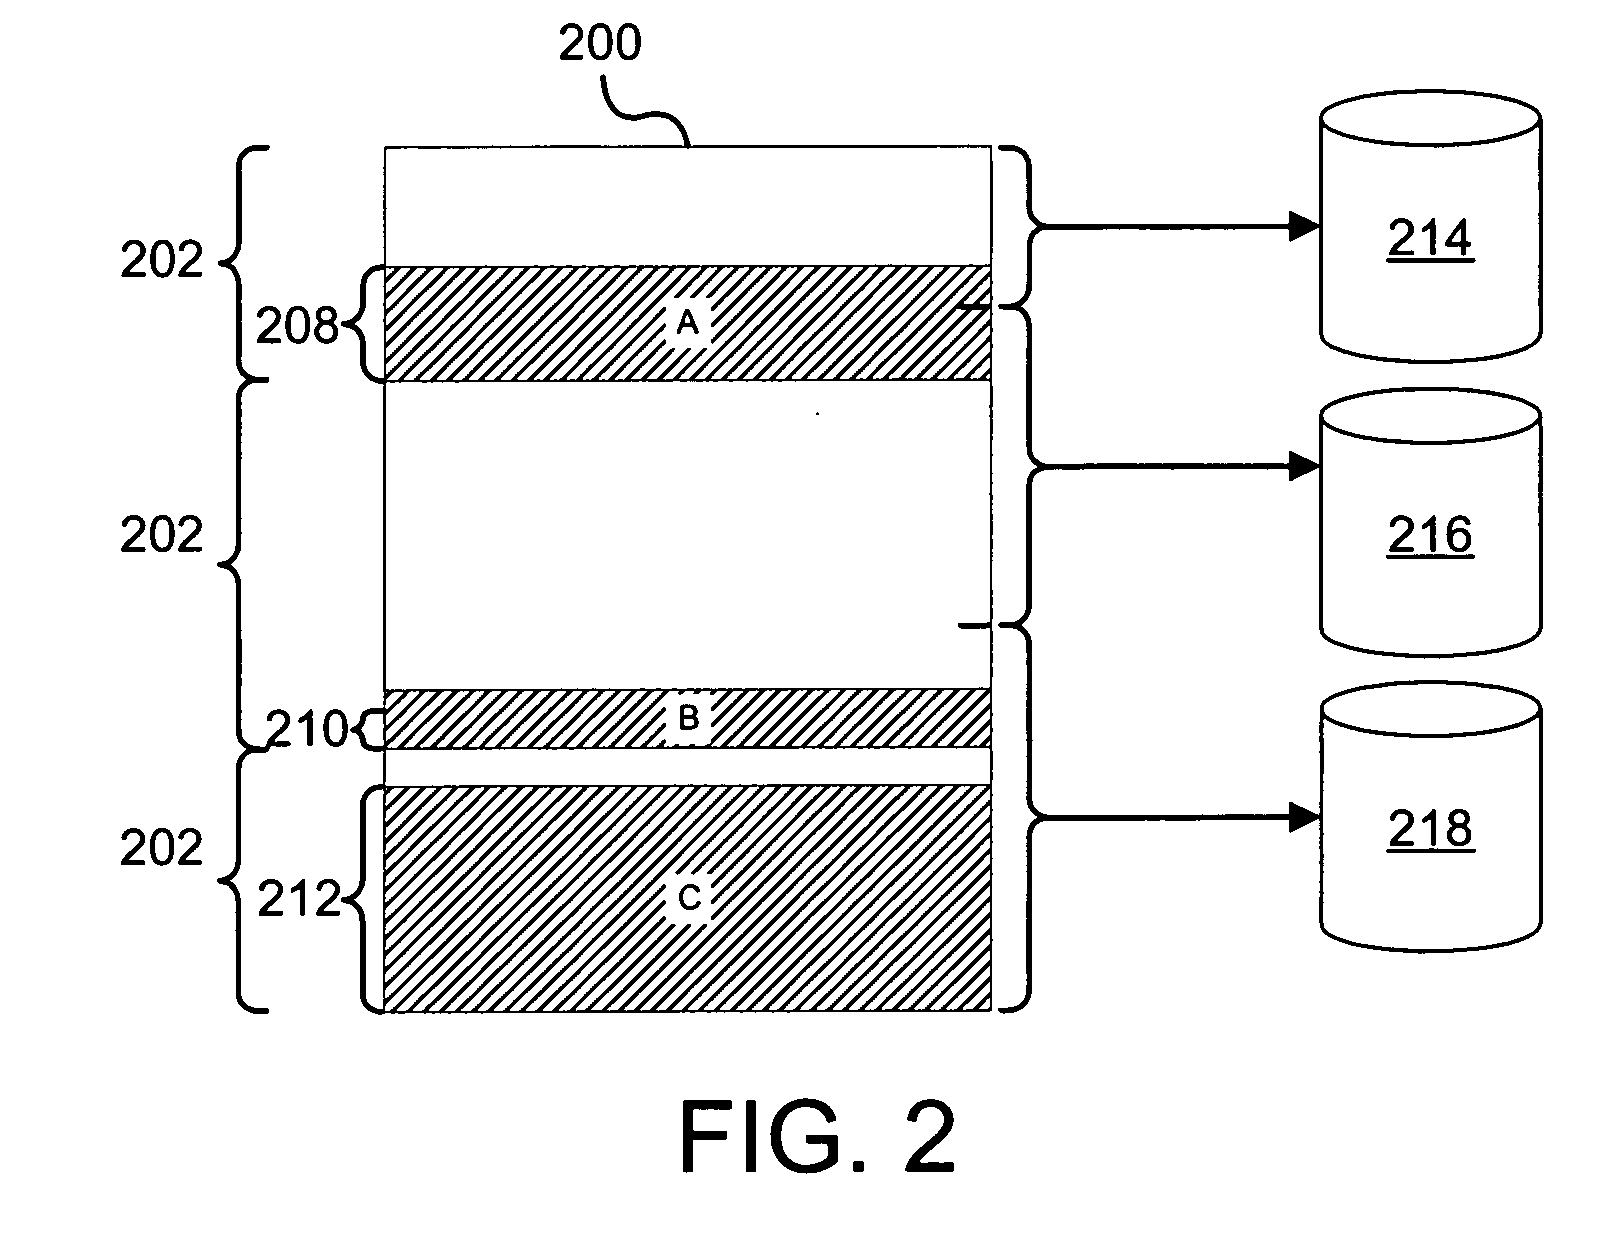 Apparatus, system, and method for presenting a mapping between a namespace and a set of computing resources